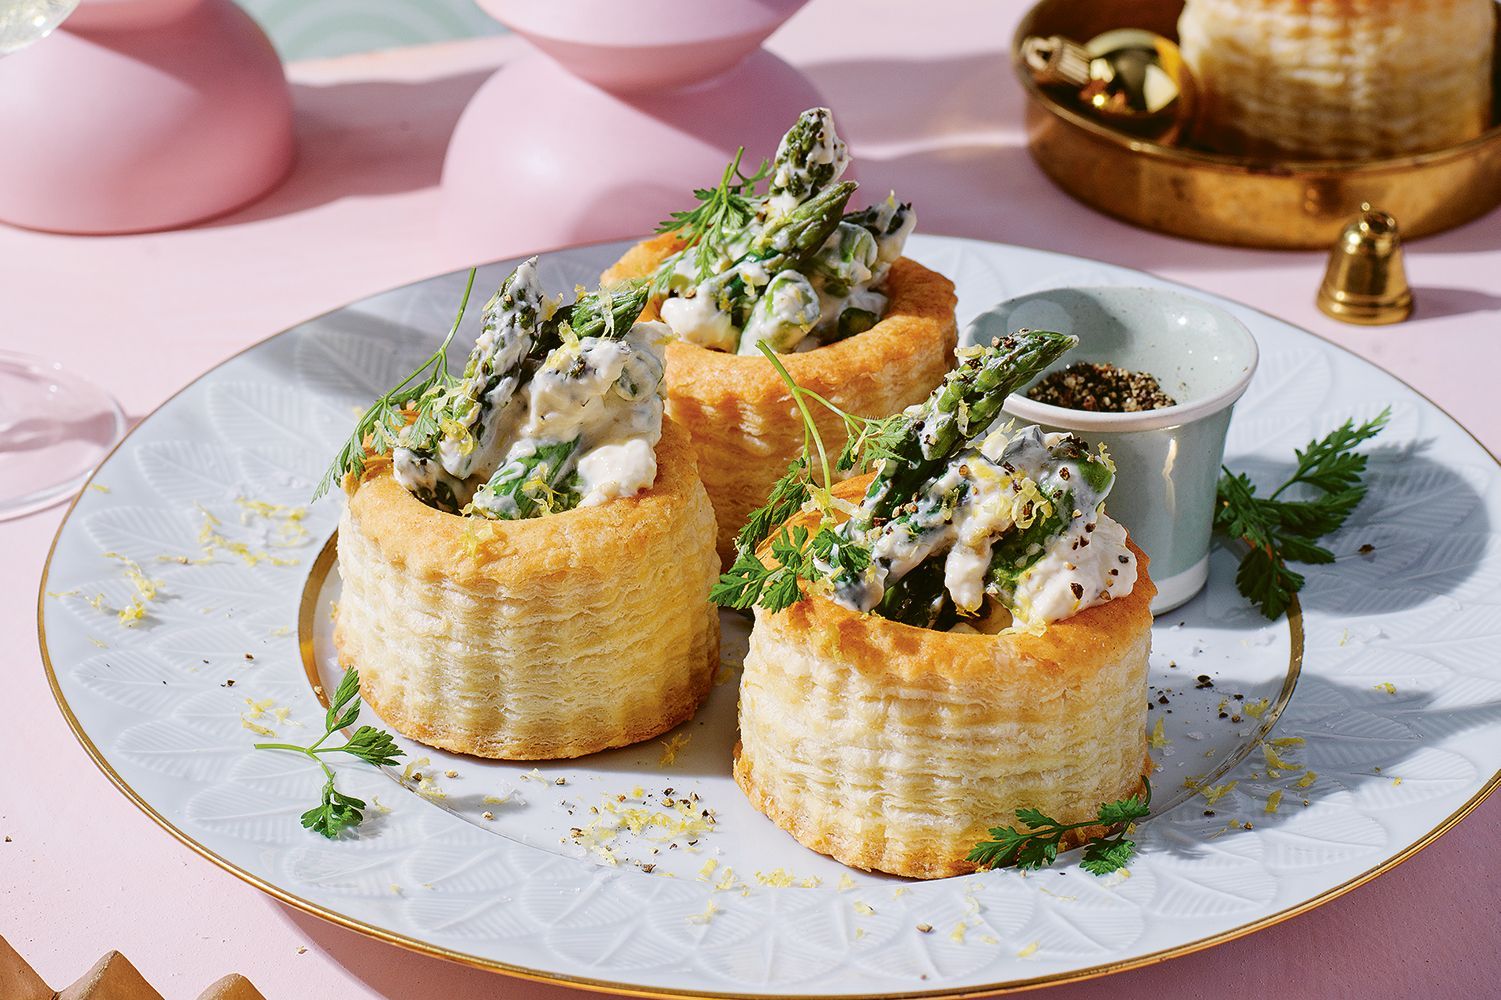 🌮 Eat an International Food for Every Letter of the Alphabet If You Want Us to Guess Your Generation asparagus and creme fraiche Vol-au-vents